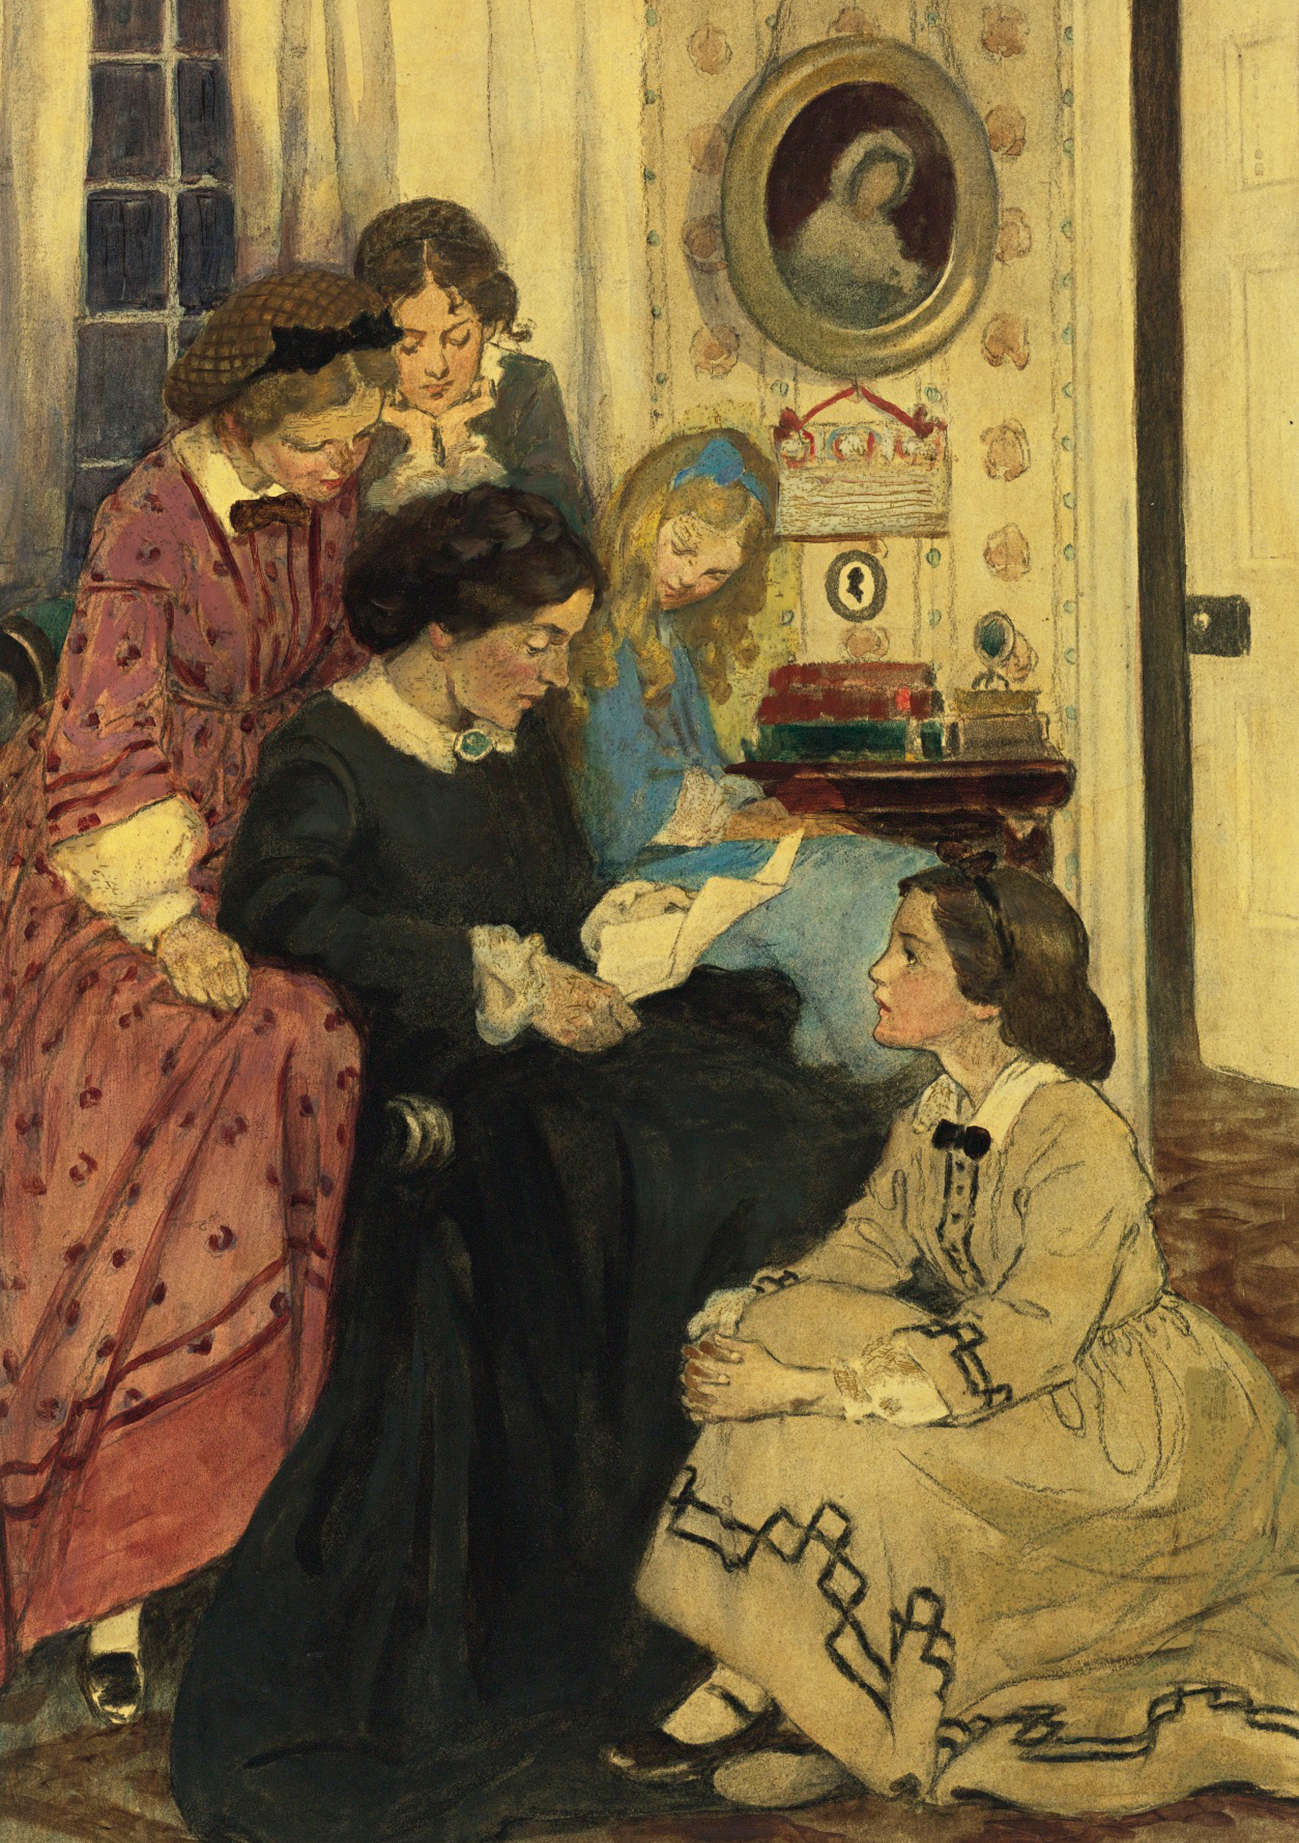 Illustration by Jessie Wilcox Smith of a moment from Little Women 